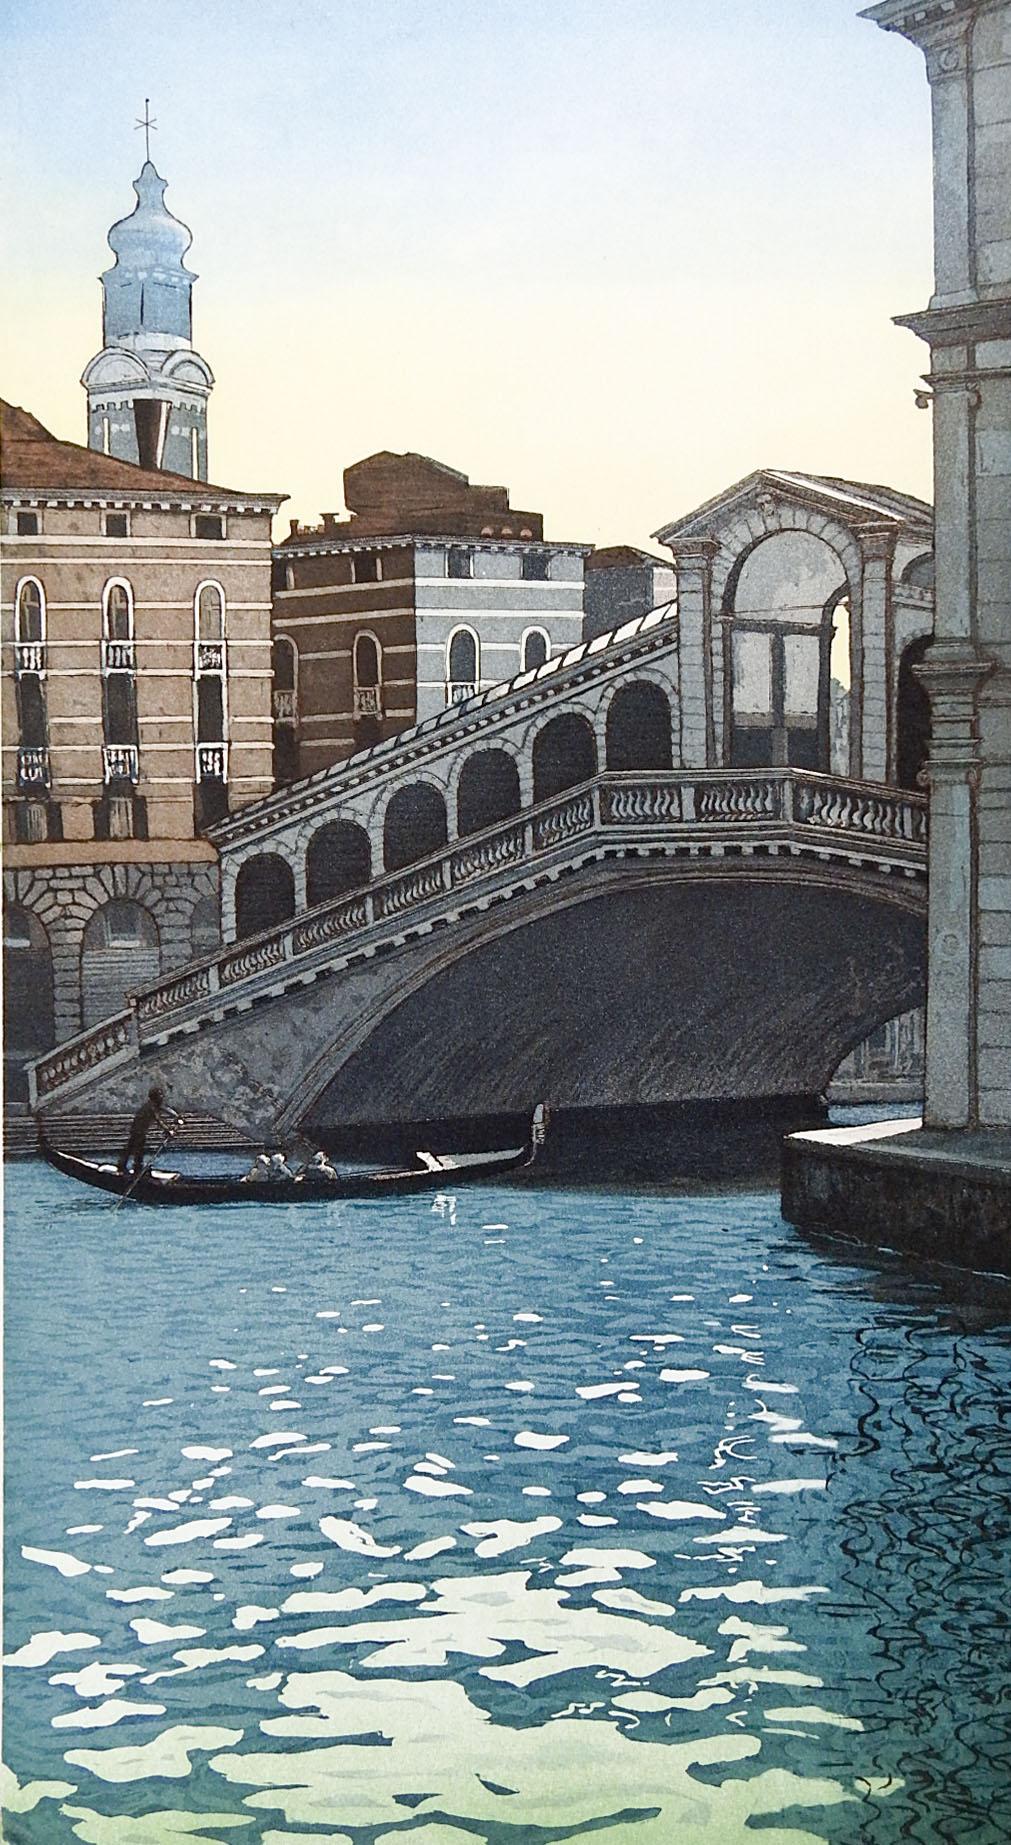 Rialto Bridge, Venice Italy by Frances St. Clair Miller etching on paper. Signed, numbered 24/100 and titled in pencil in lower margin. Unframed, image size 12